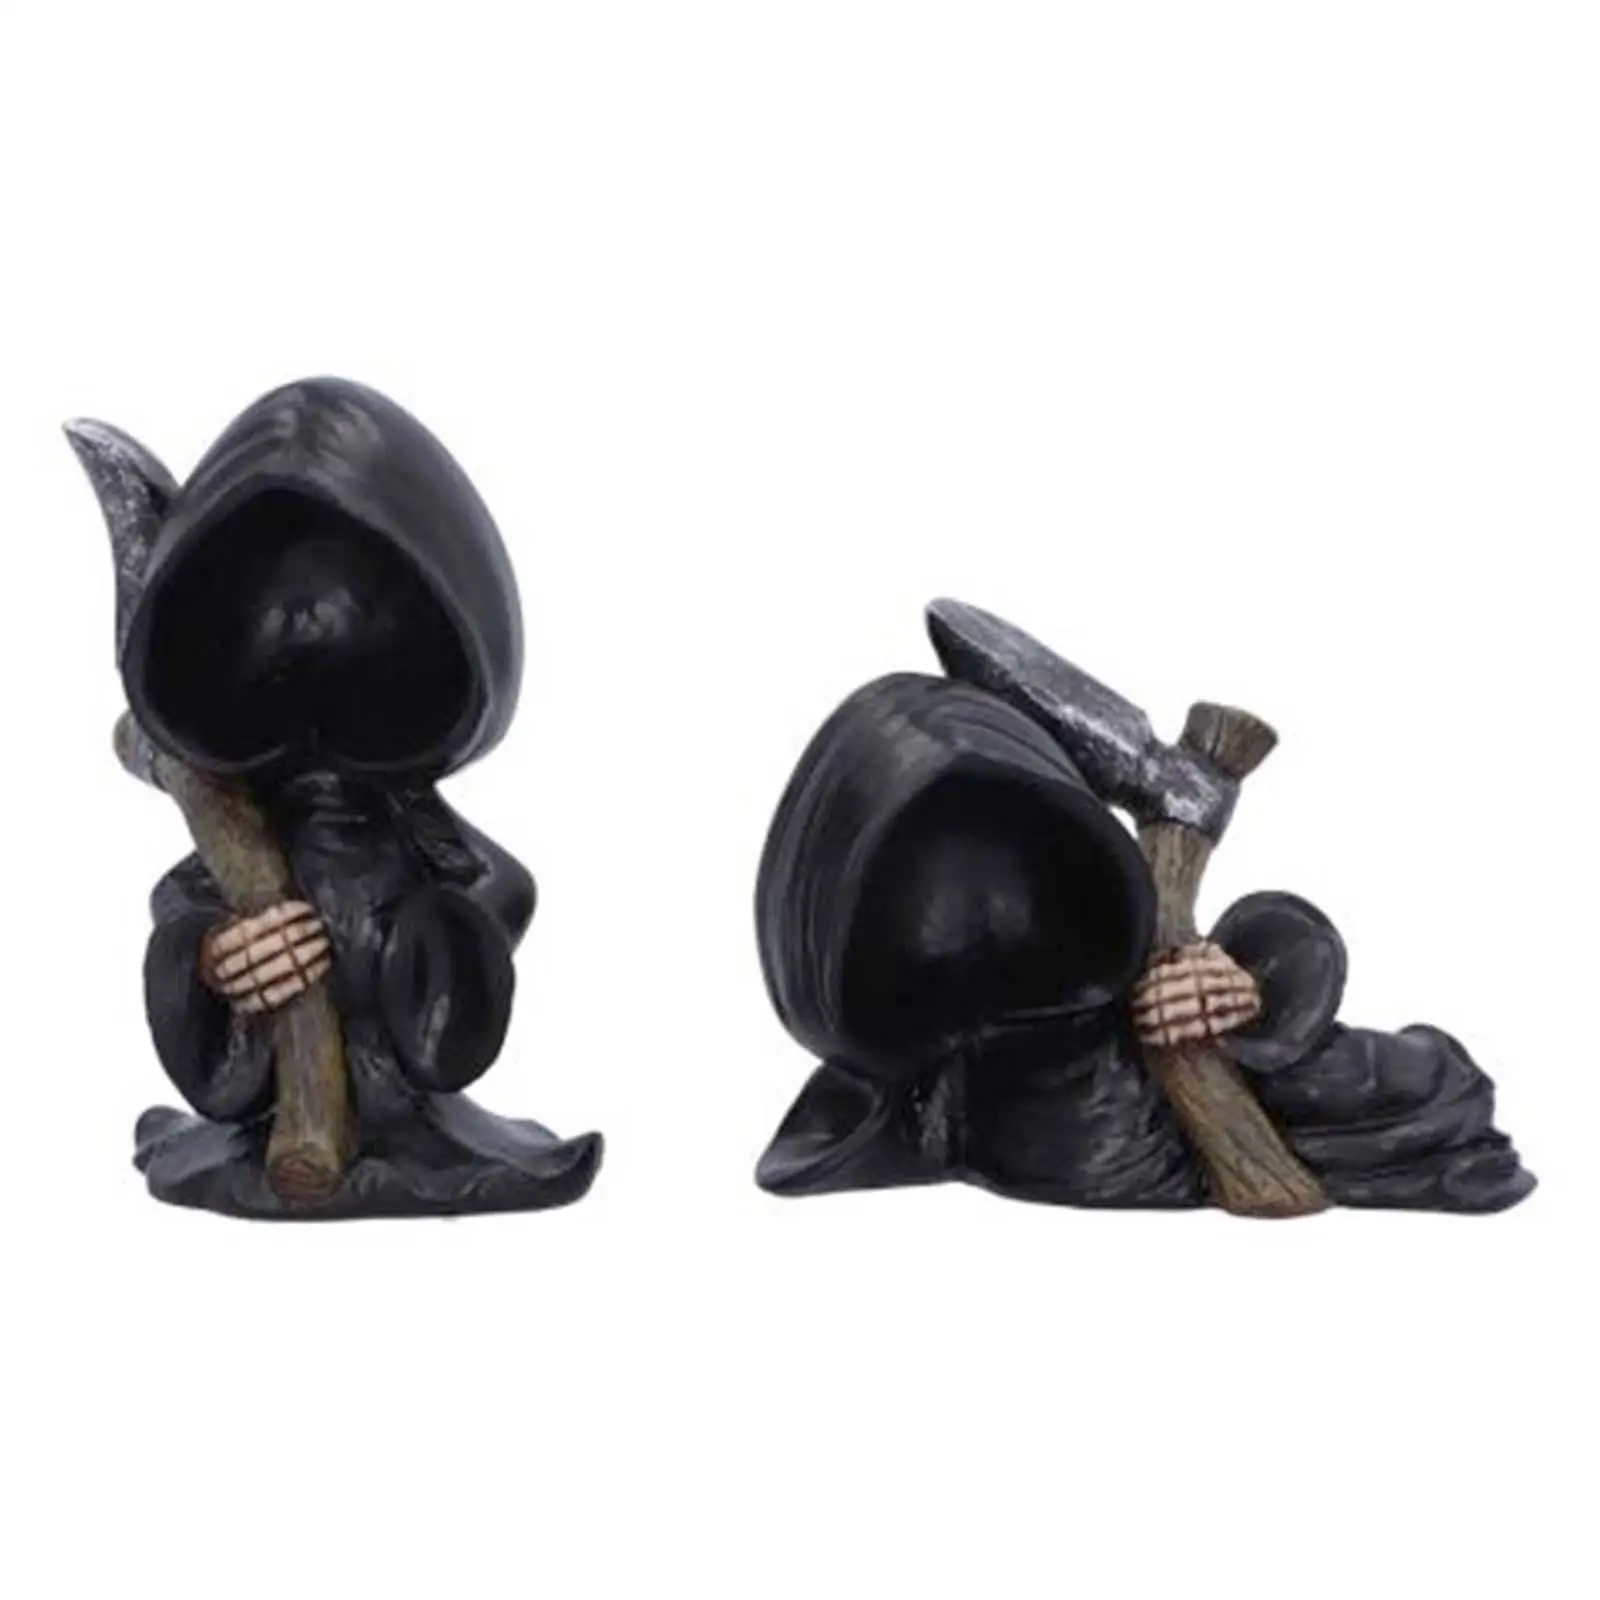 Halloween Figurine Gothic Party Resin Sculpture Fireplace Statue